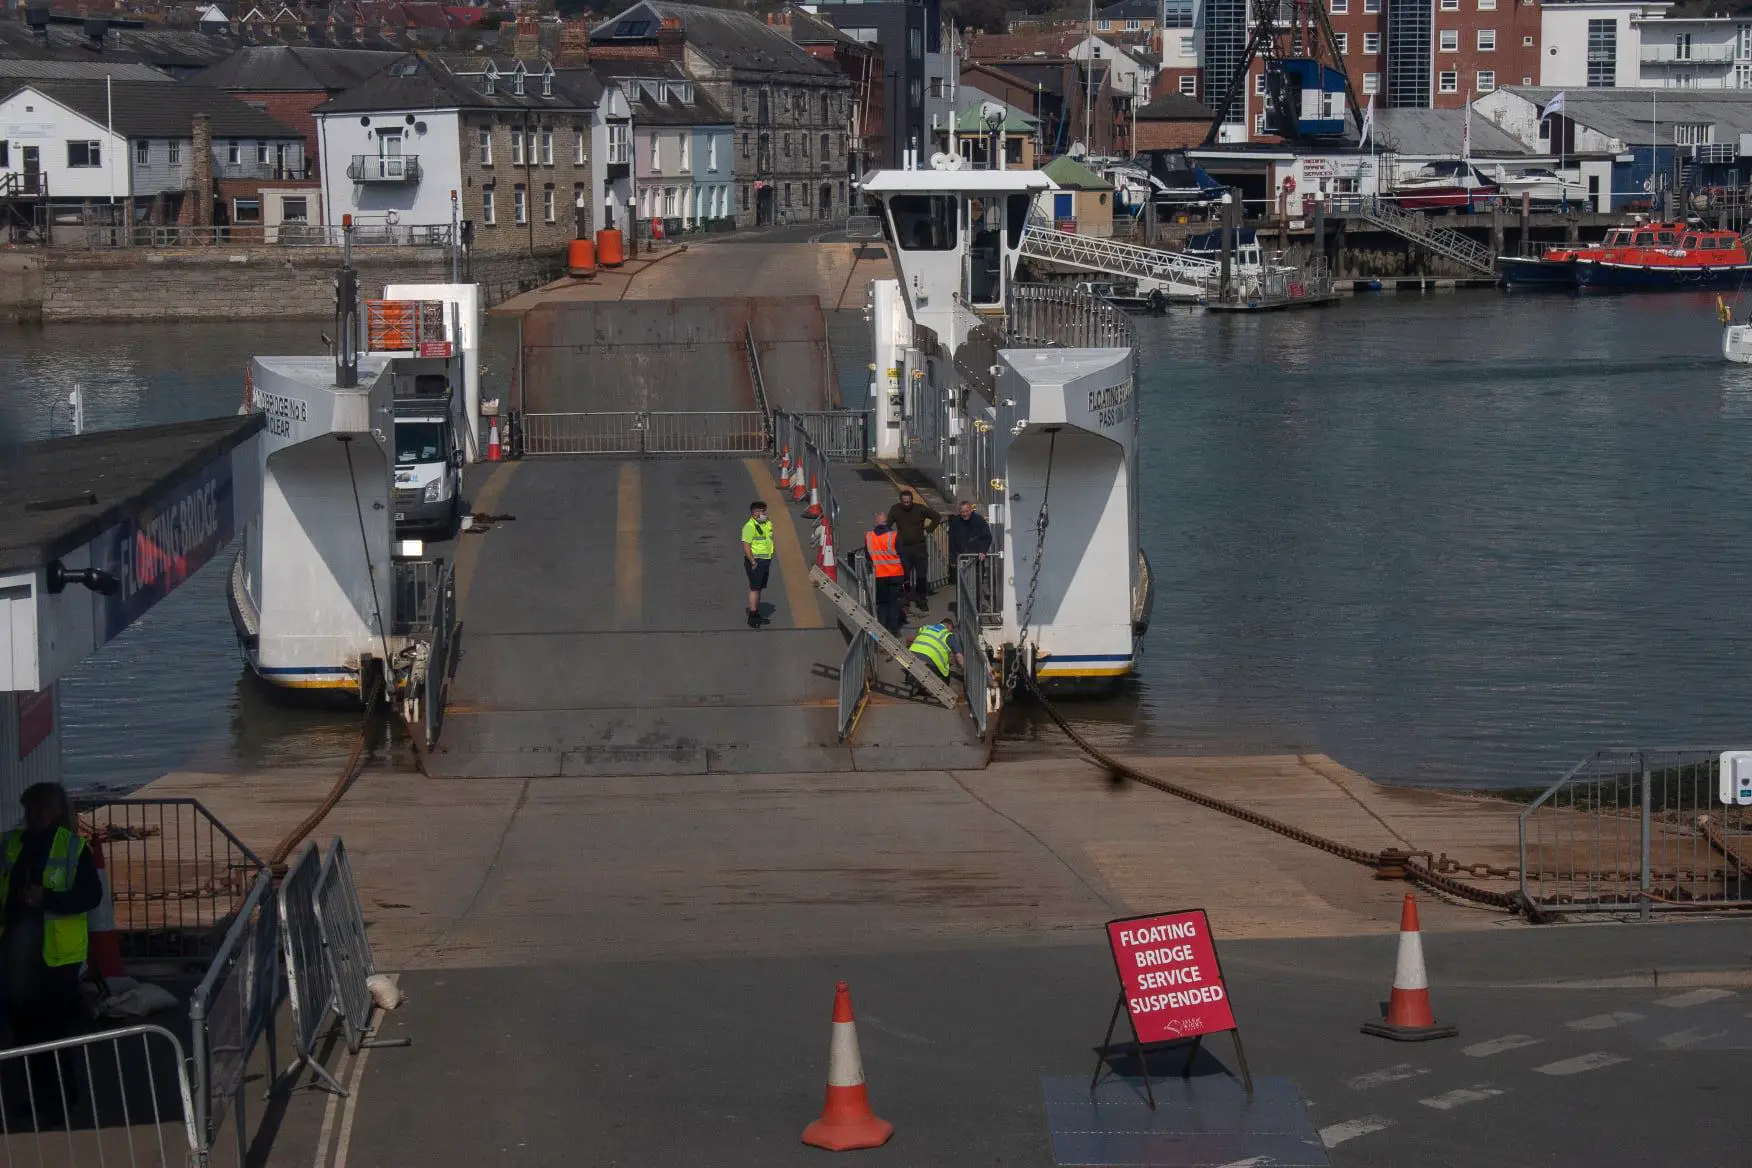 Cowes Floating Bridge suspended - workers on the bridge carrying out repairs